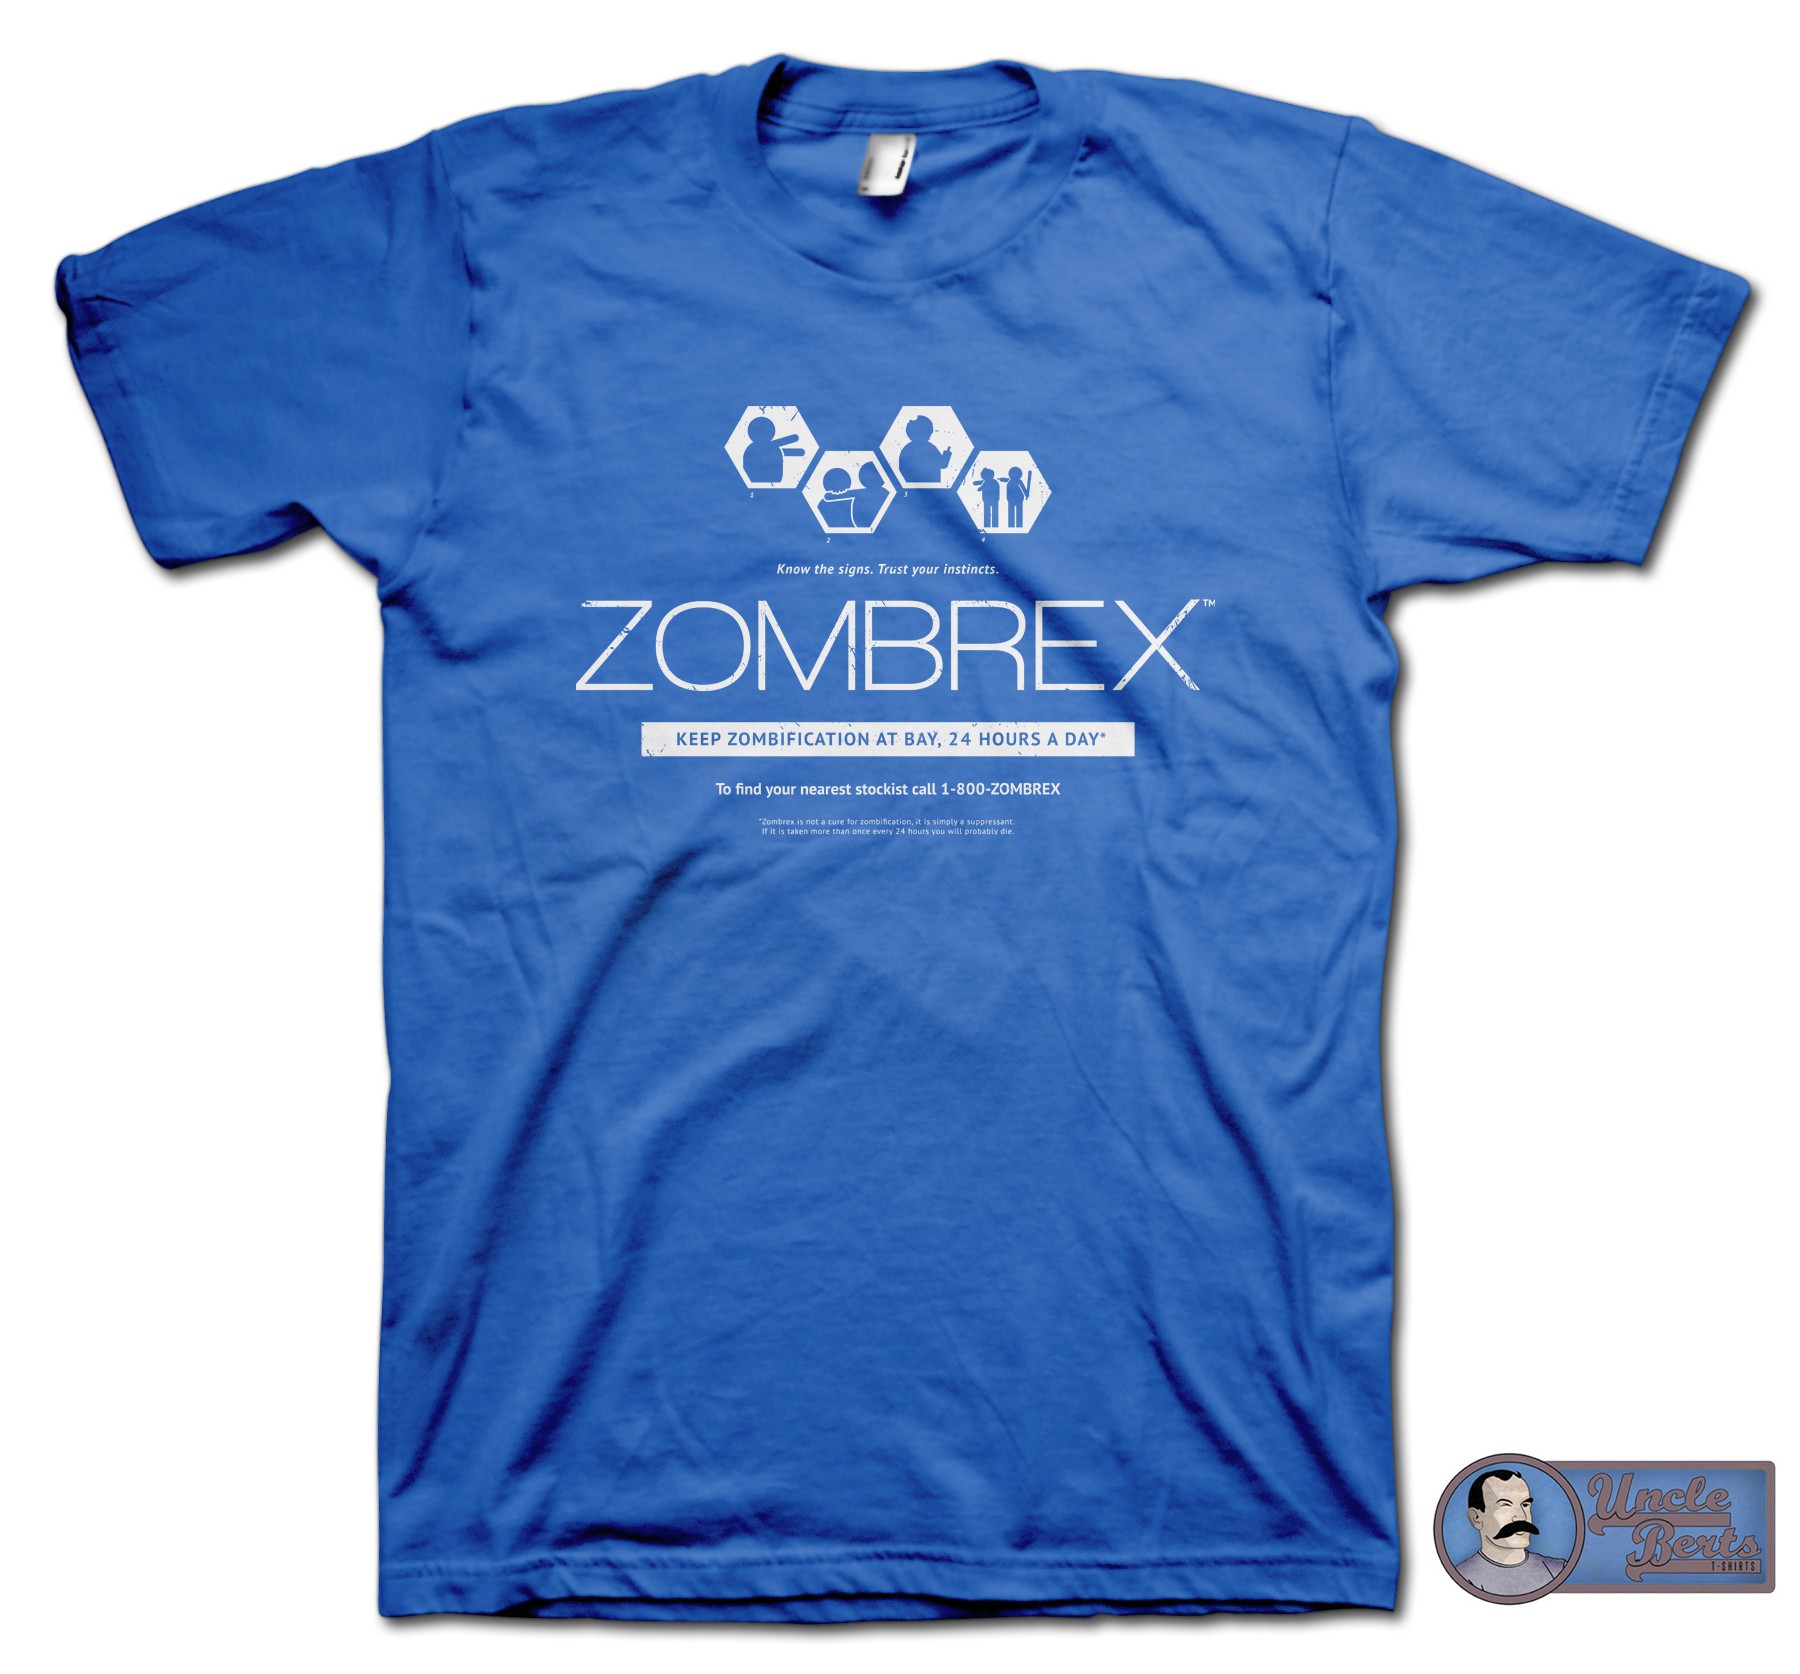 Zombrex T-Shirt - inspired by the Dead Rising series